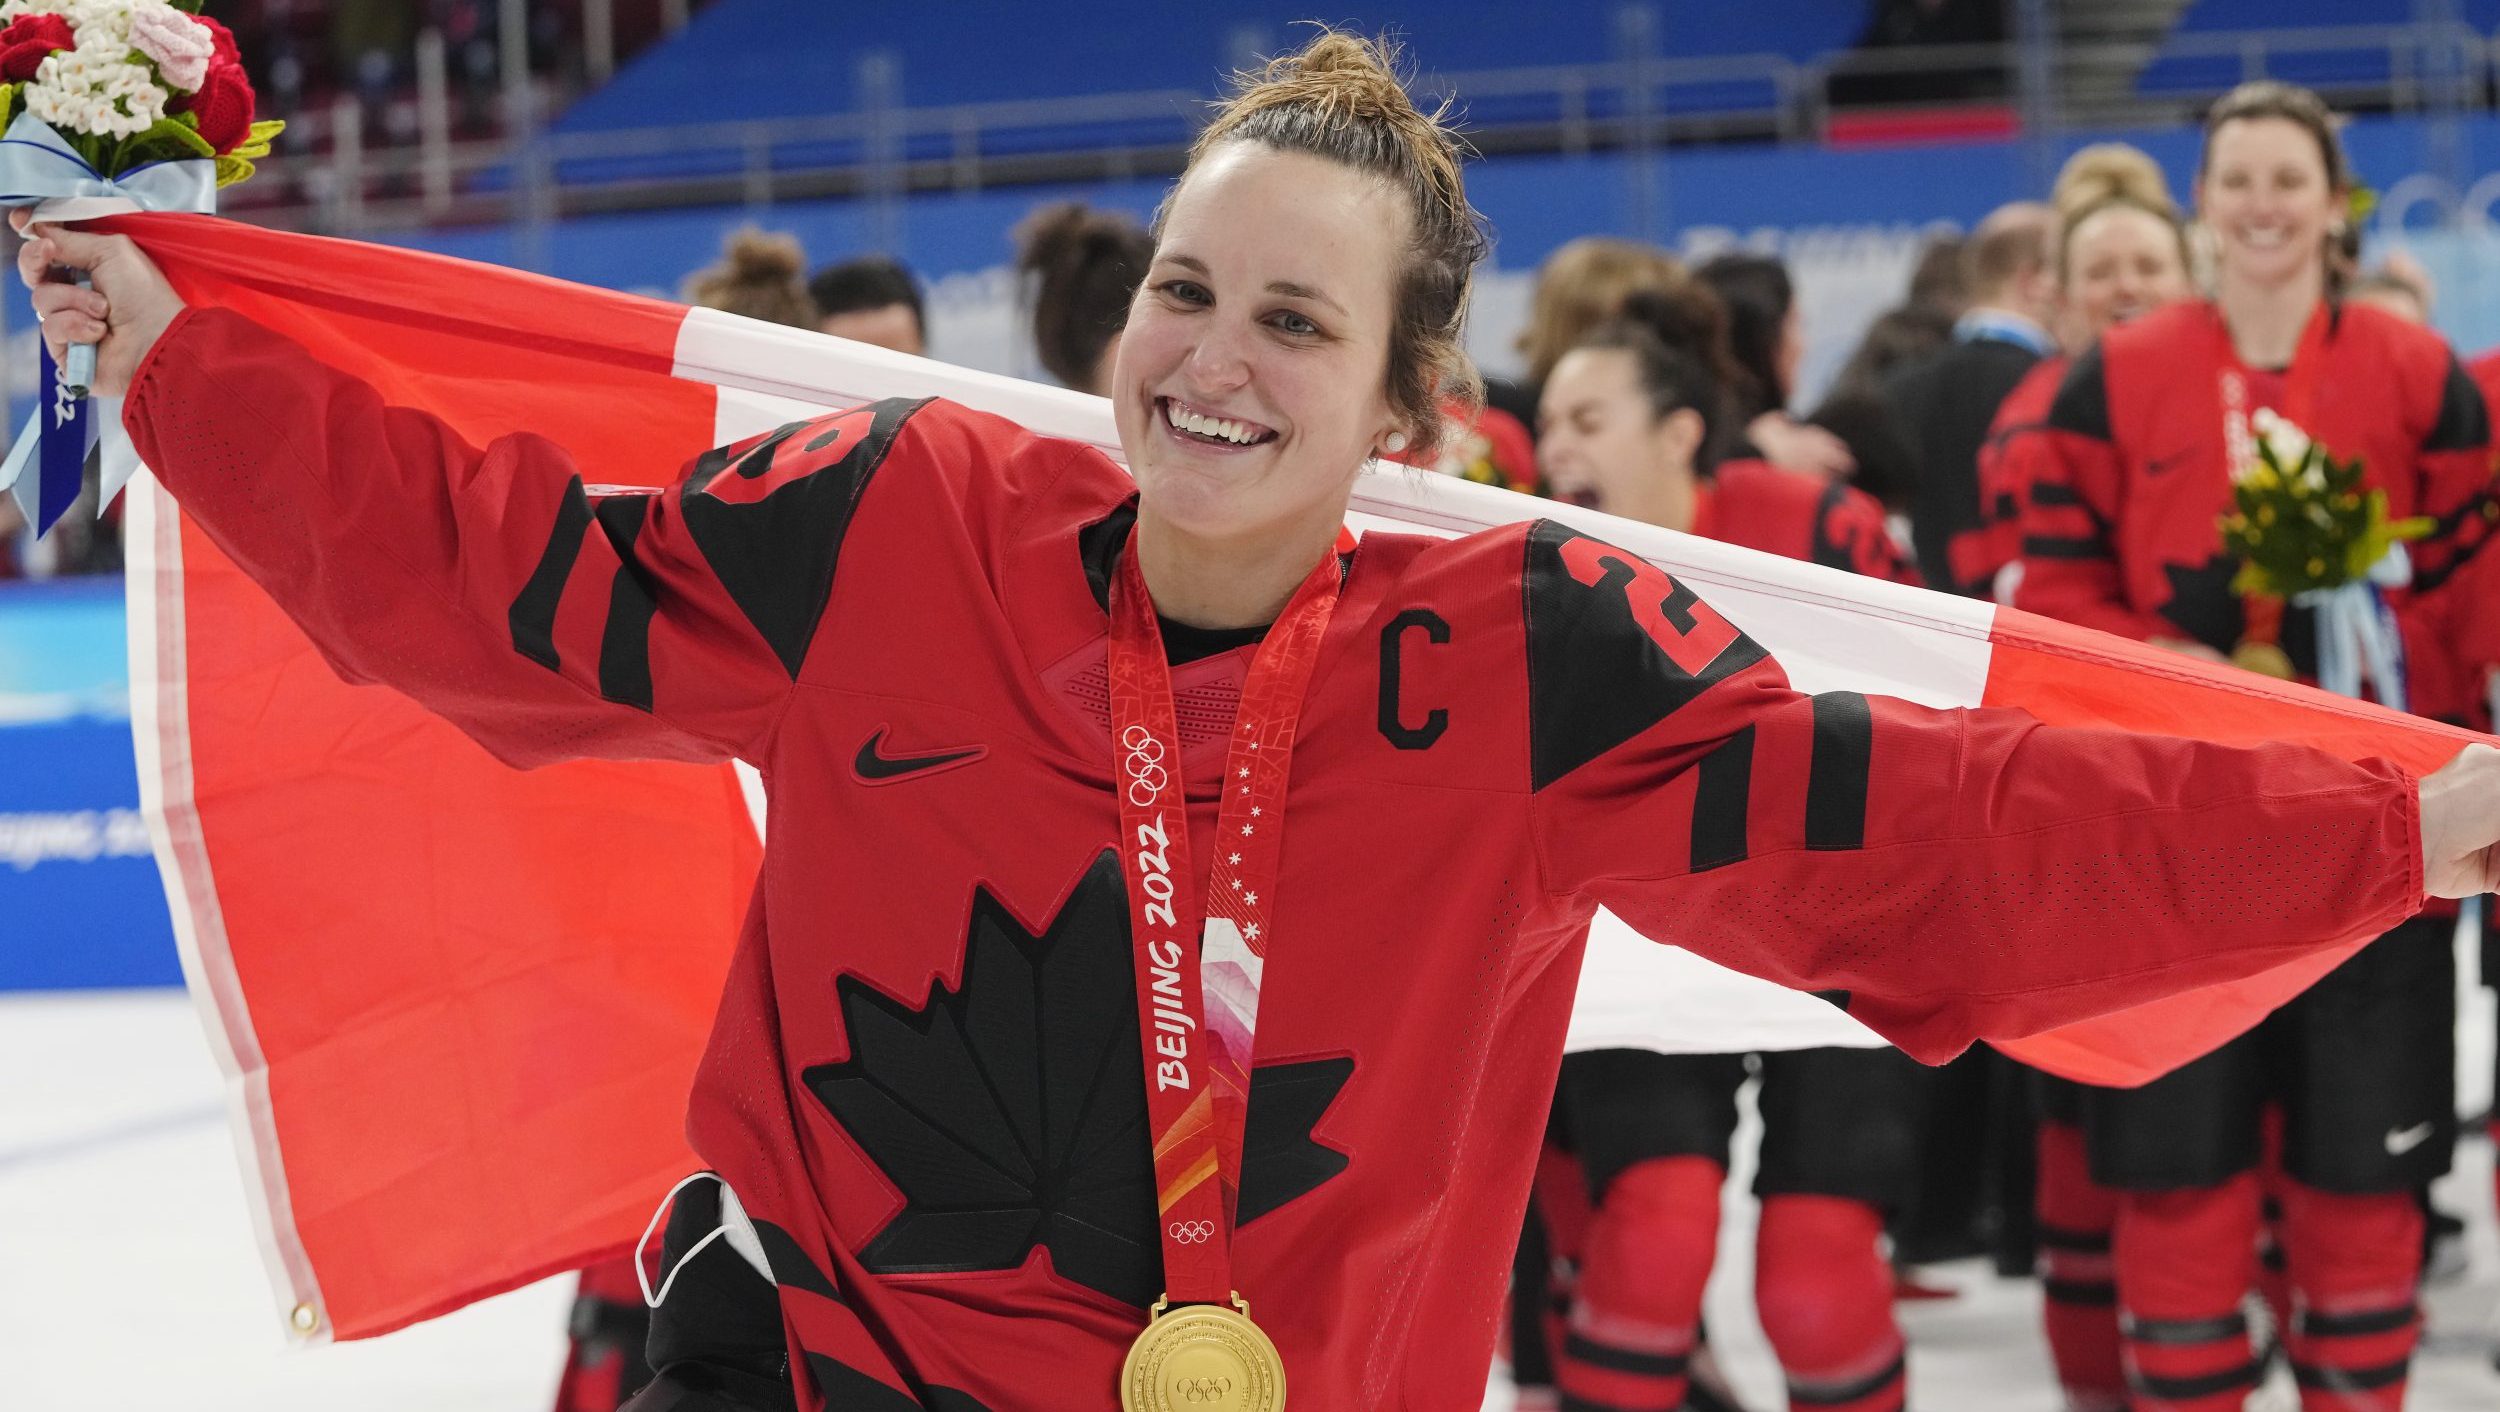 Kaz Watch: Marie-Philip Poulin is back at full strength on the ice